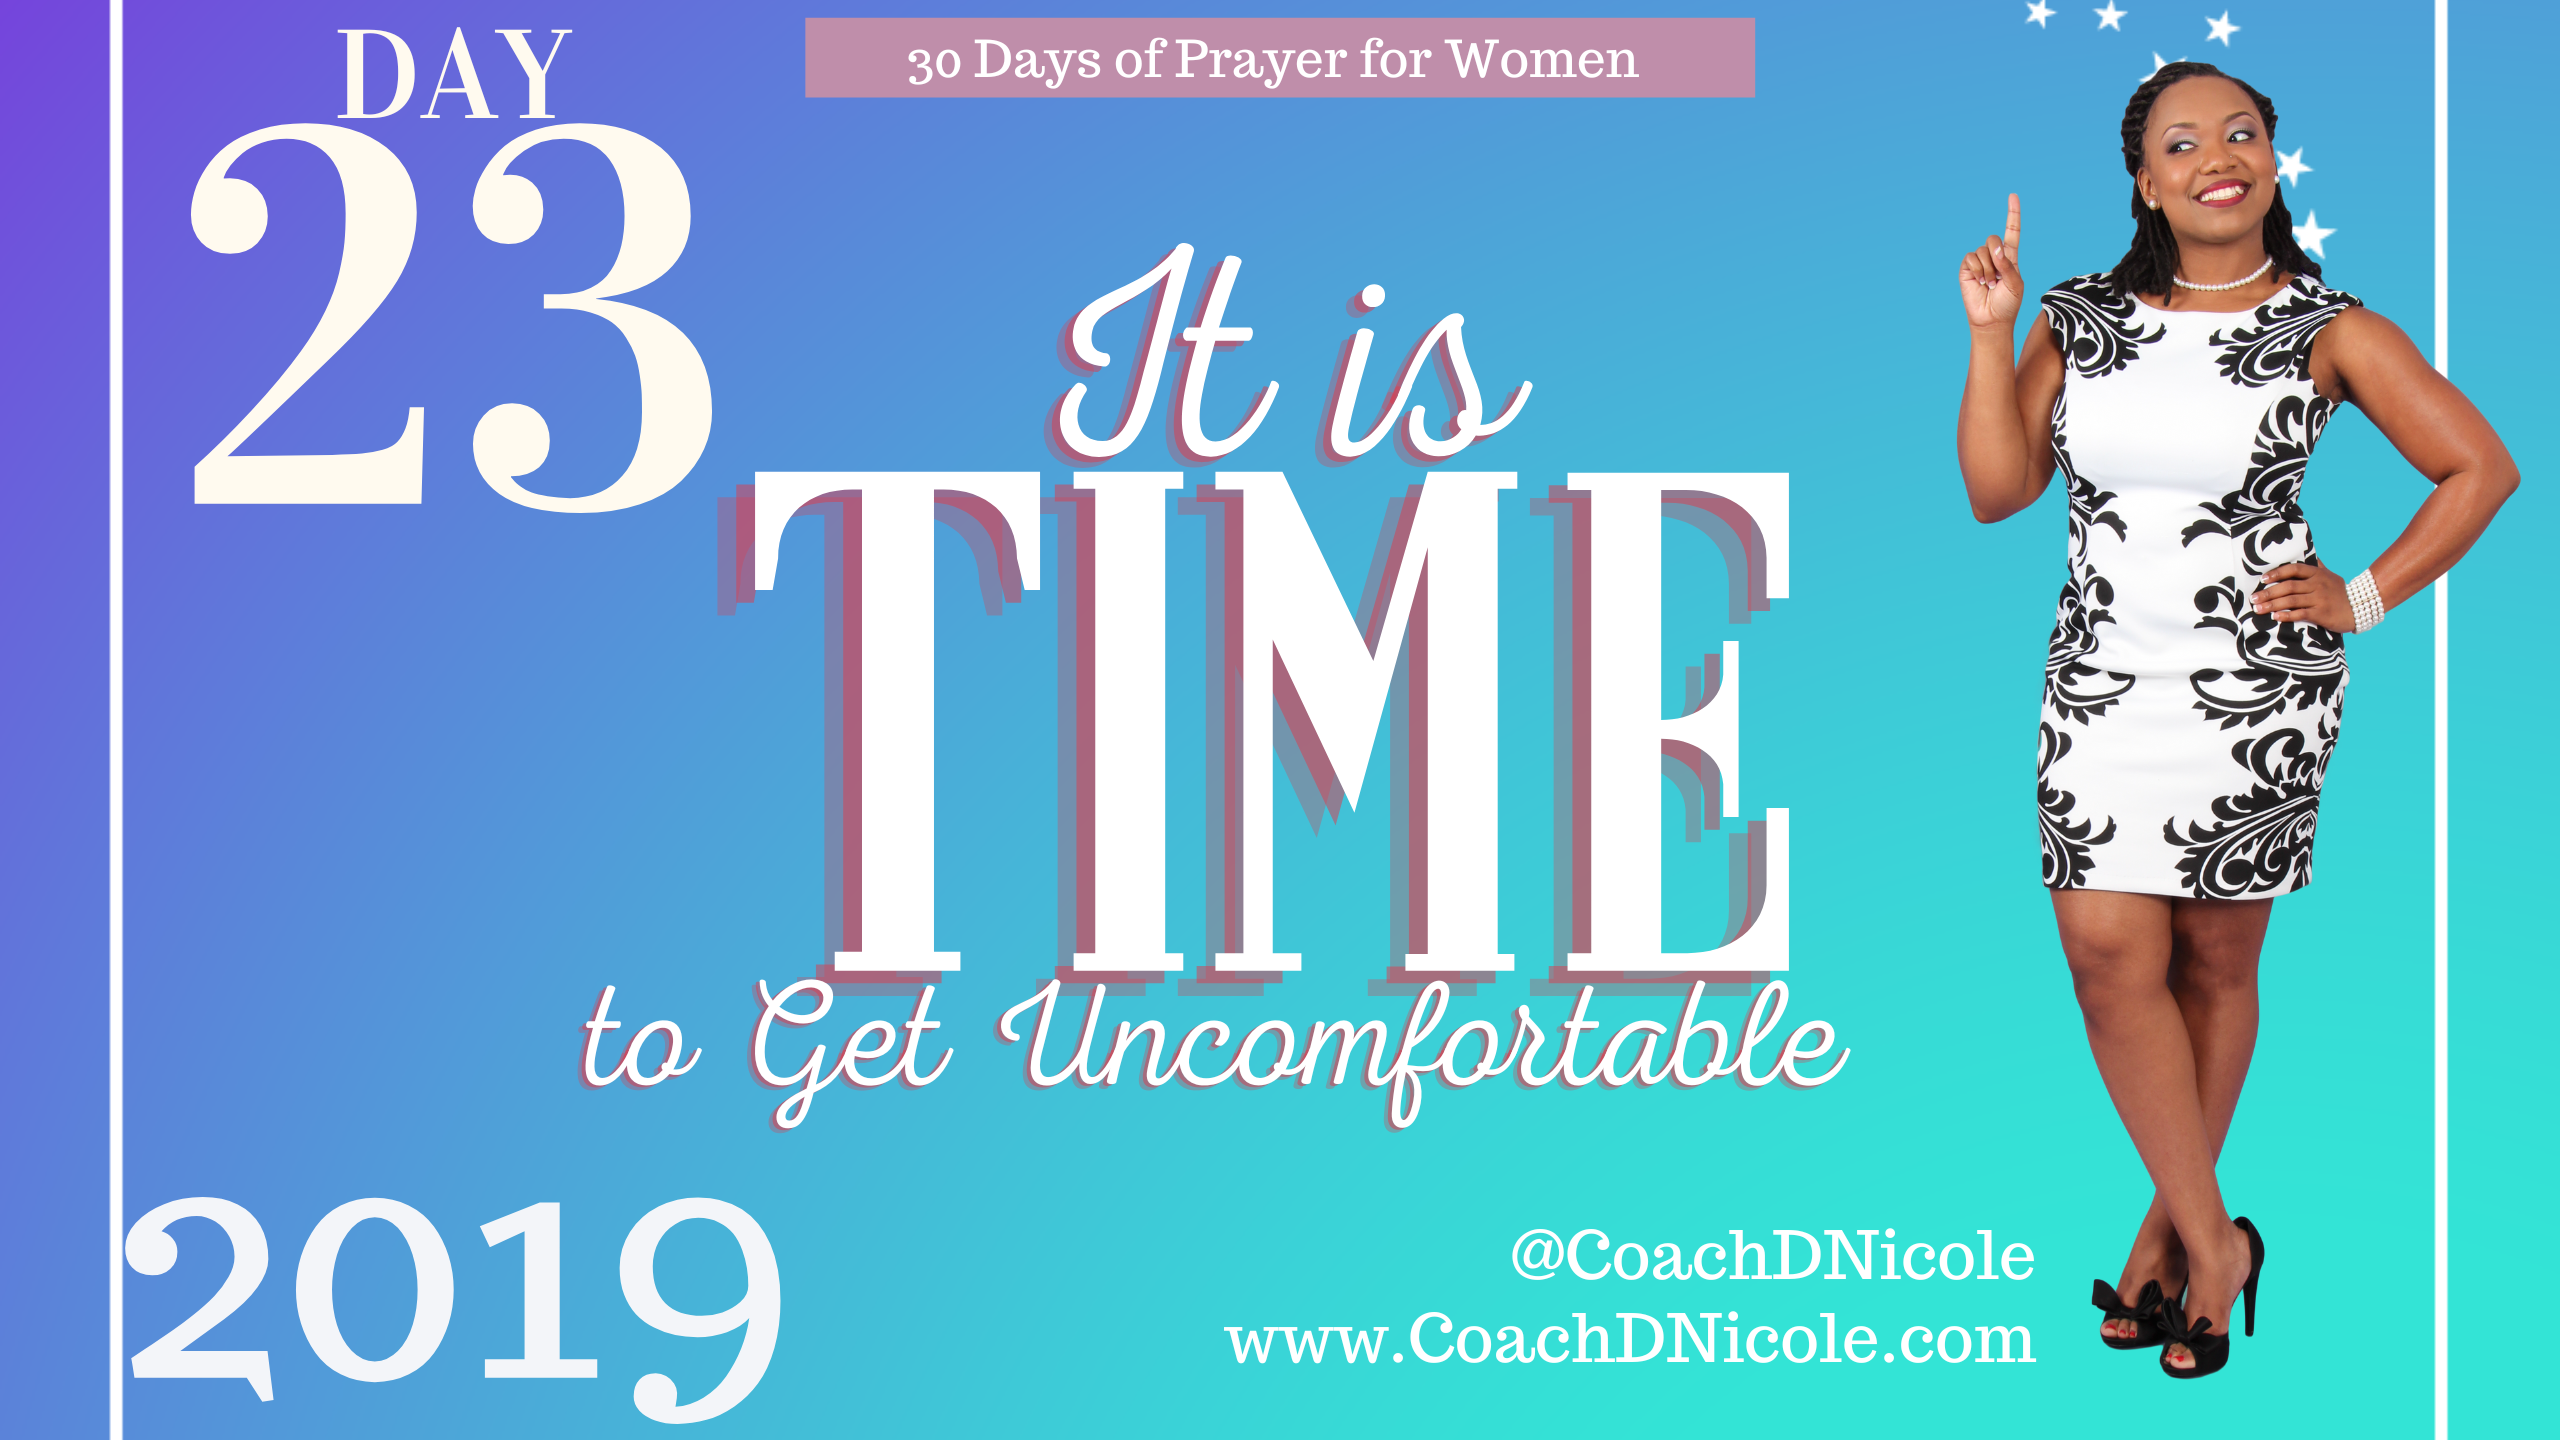 Step Outside of Your Comfort zone 30 Days of Prayer | #OurSisterCircle women in prayer, 30 days of prayer for women